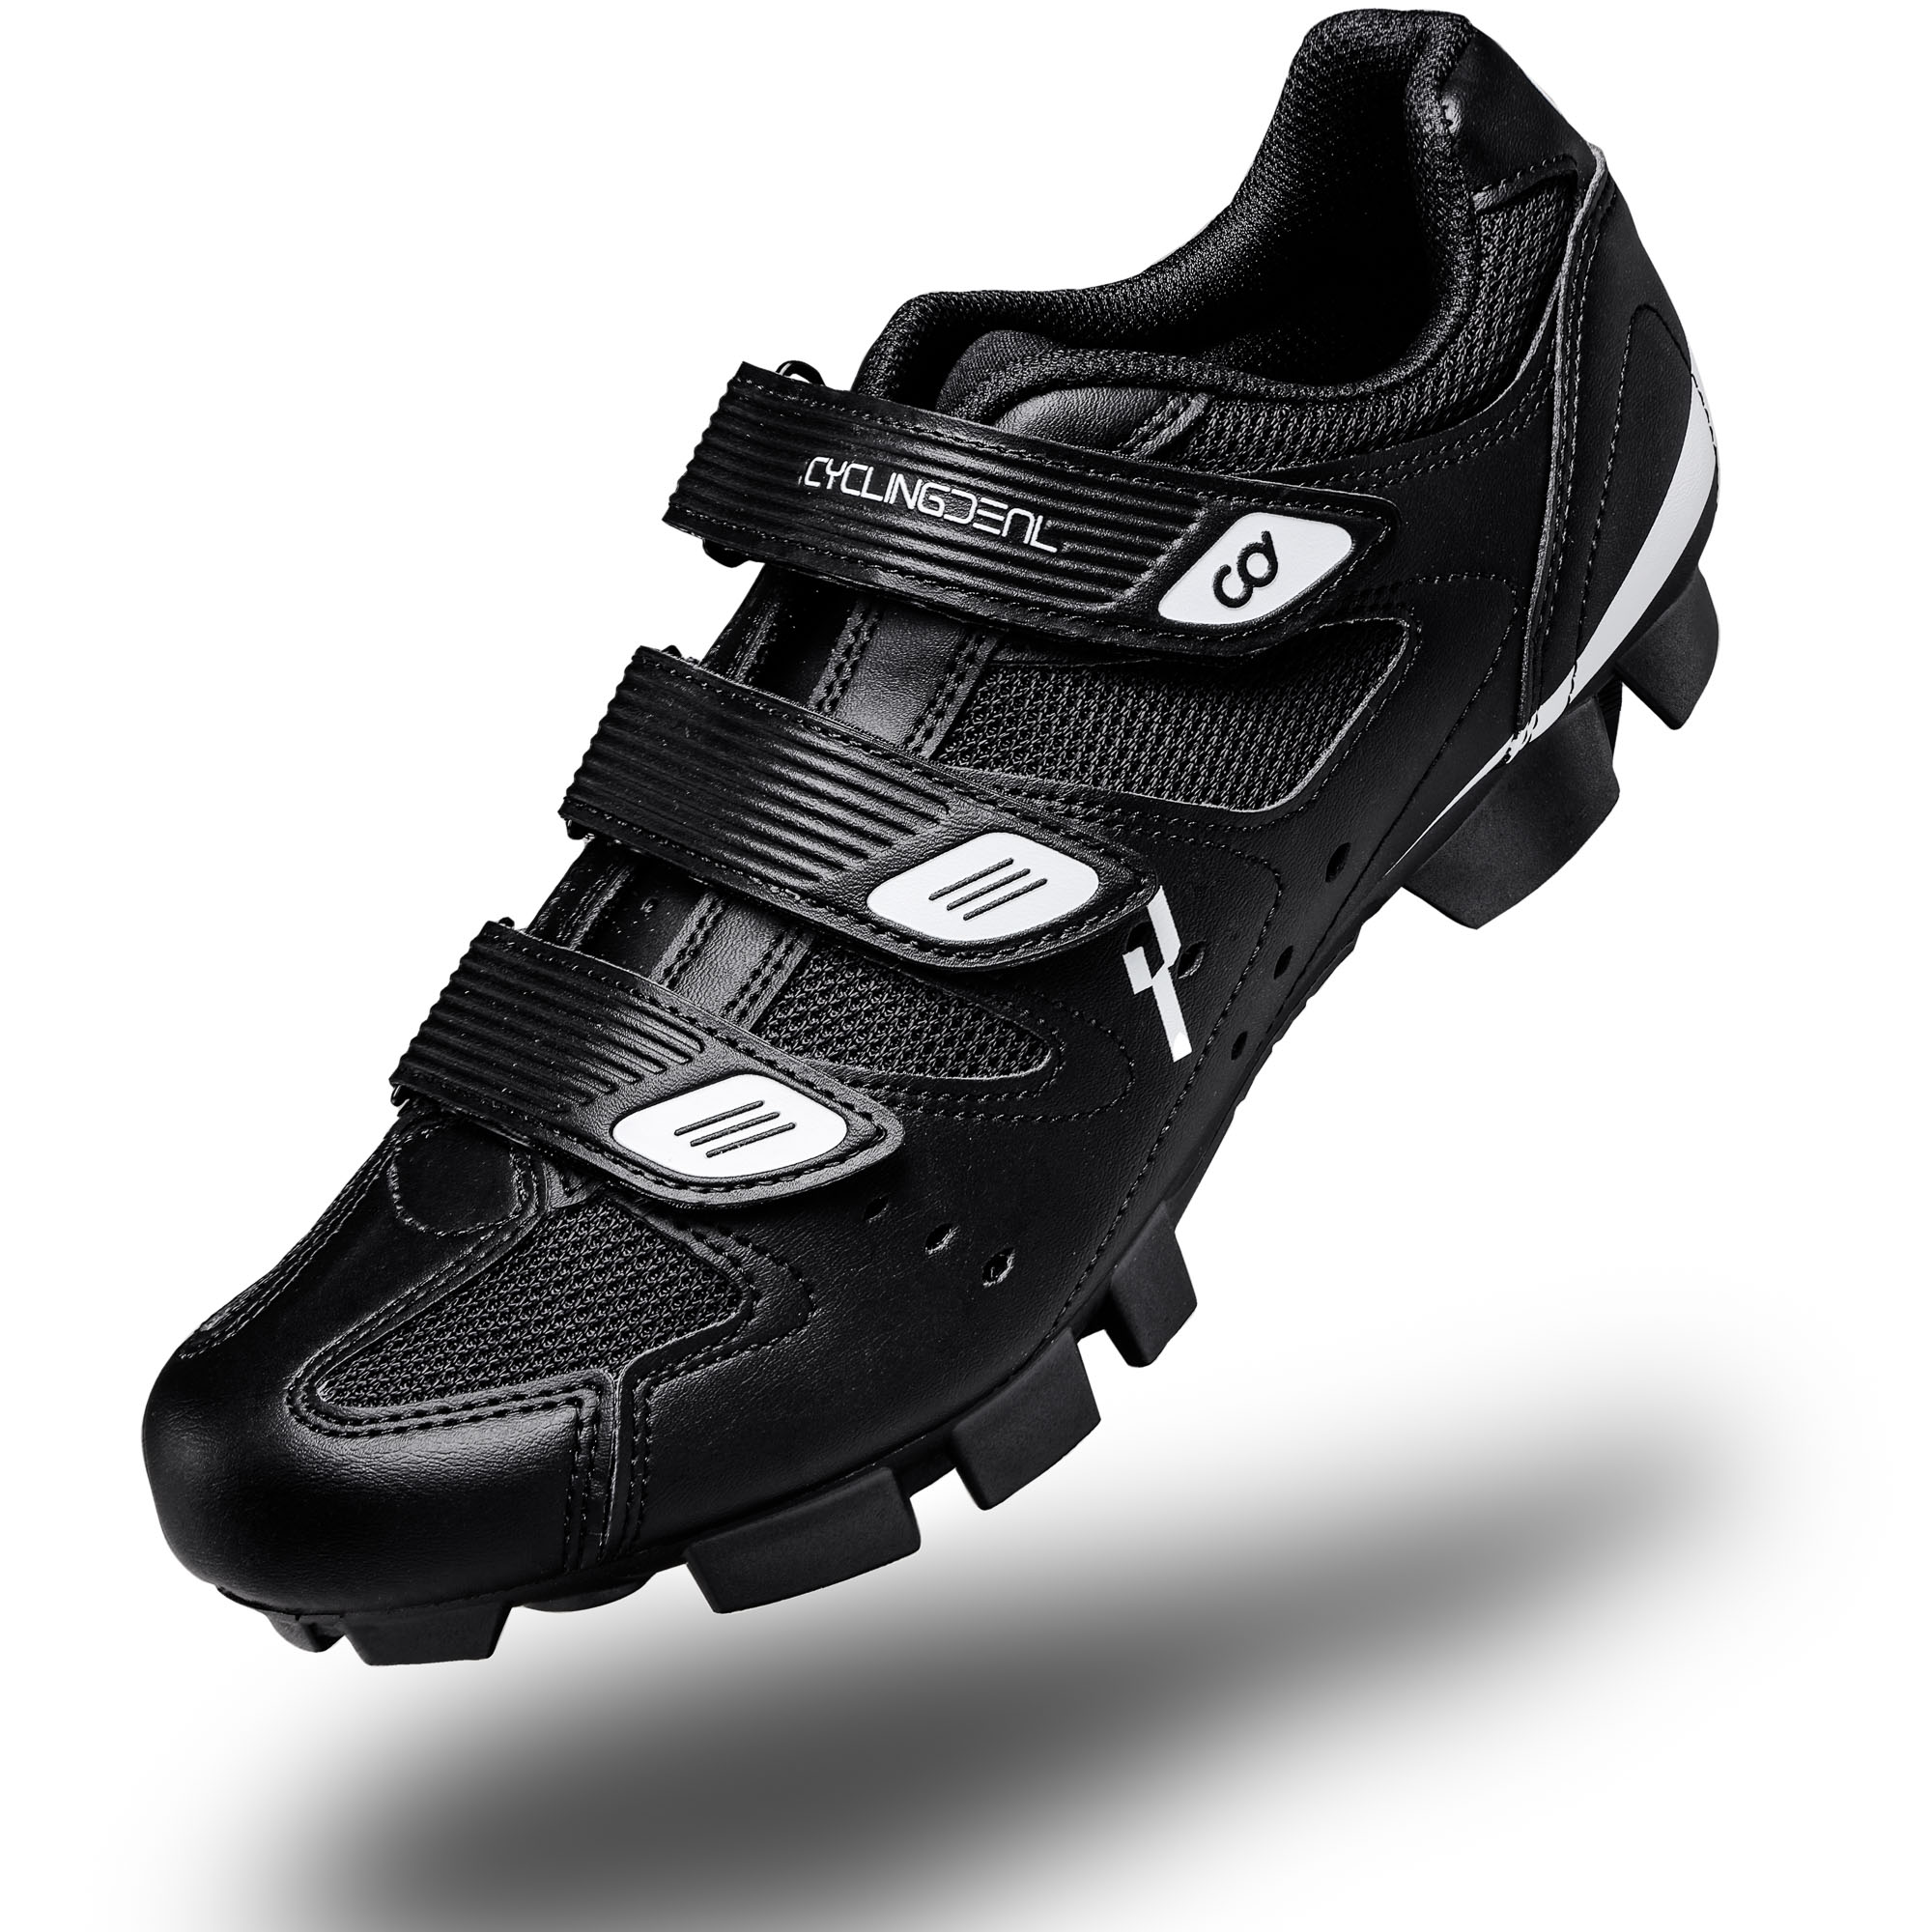 CyclingDeal Mountain Bicycle Bike Men's MTB Cycling Shoes Black Compatible with SHIMANO SPD and CrankBrothers Cleats | Size 42